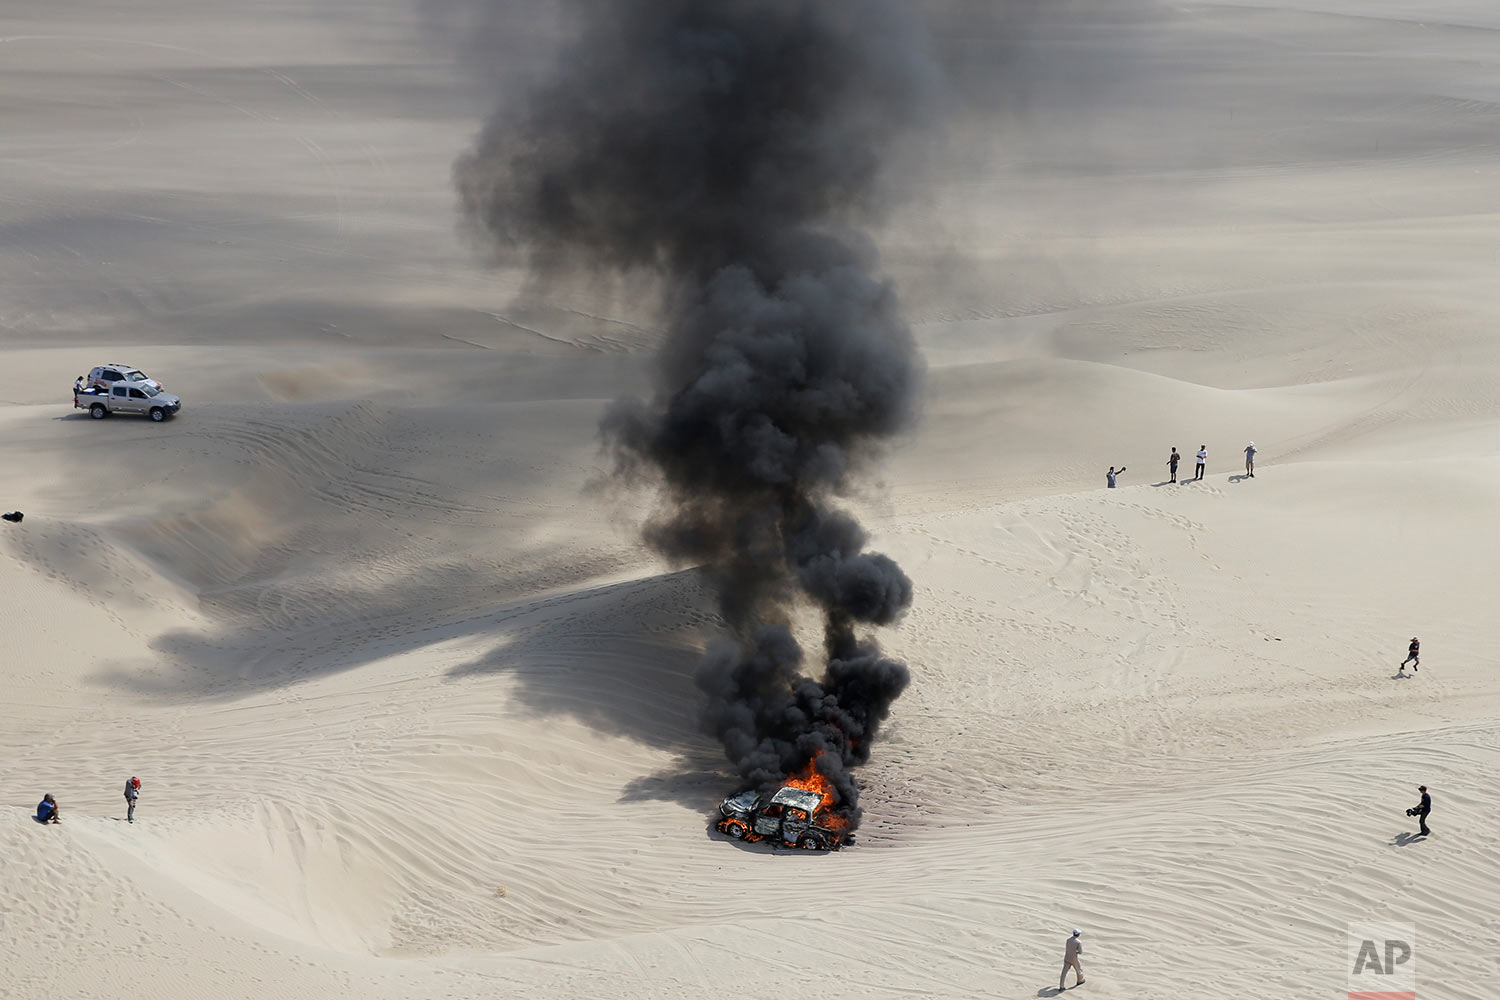  In this Monday, Jan. 8, 2018 photo, smoke rises from overheated Toyota, raced by driver Alicia Reina and co-driver Carlos Dante Pelayo, both Argentines, during the third stage of the Dakar Rally in Pisco, Peru. (AP Photo/Ricardo Mazalan)&nbsp; |&nbs